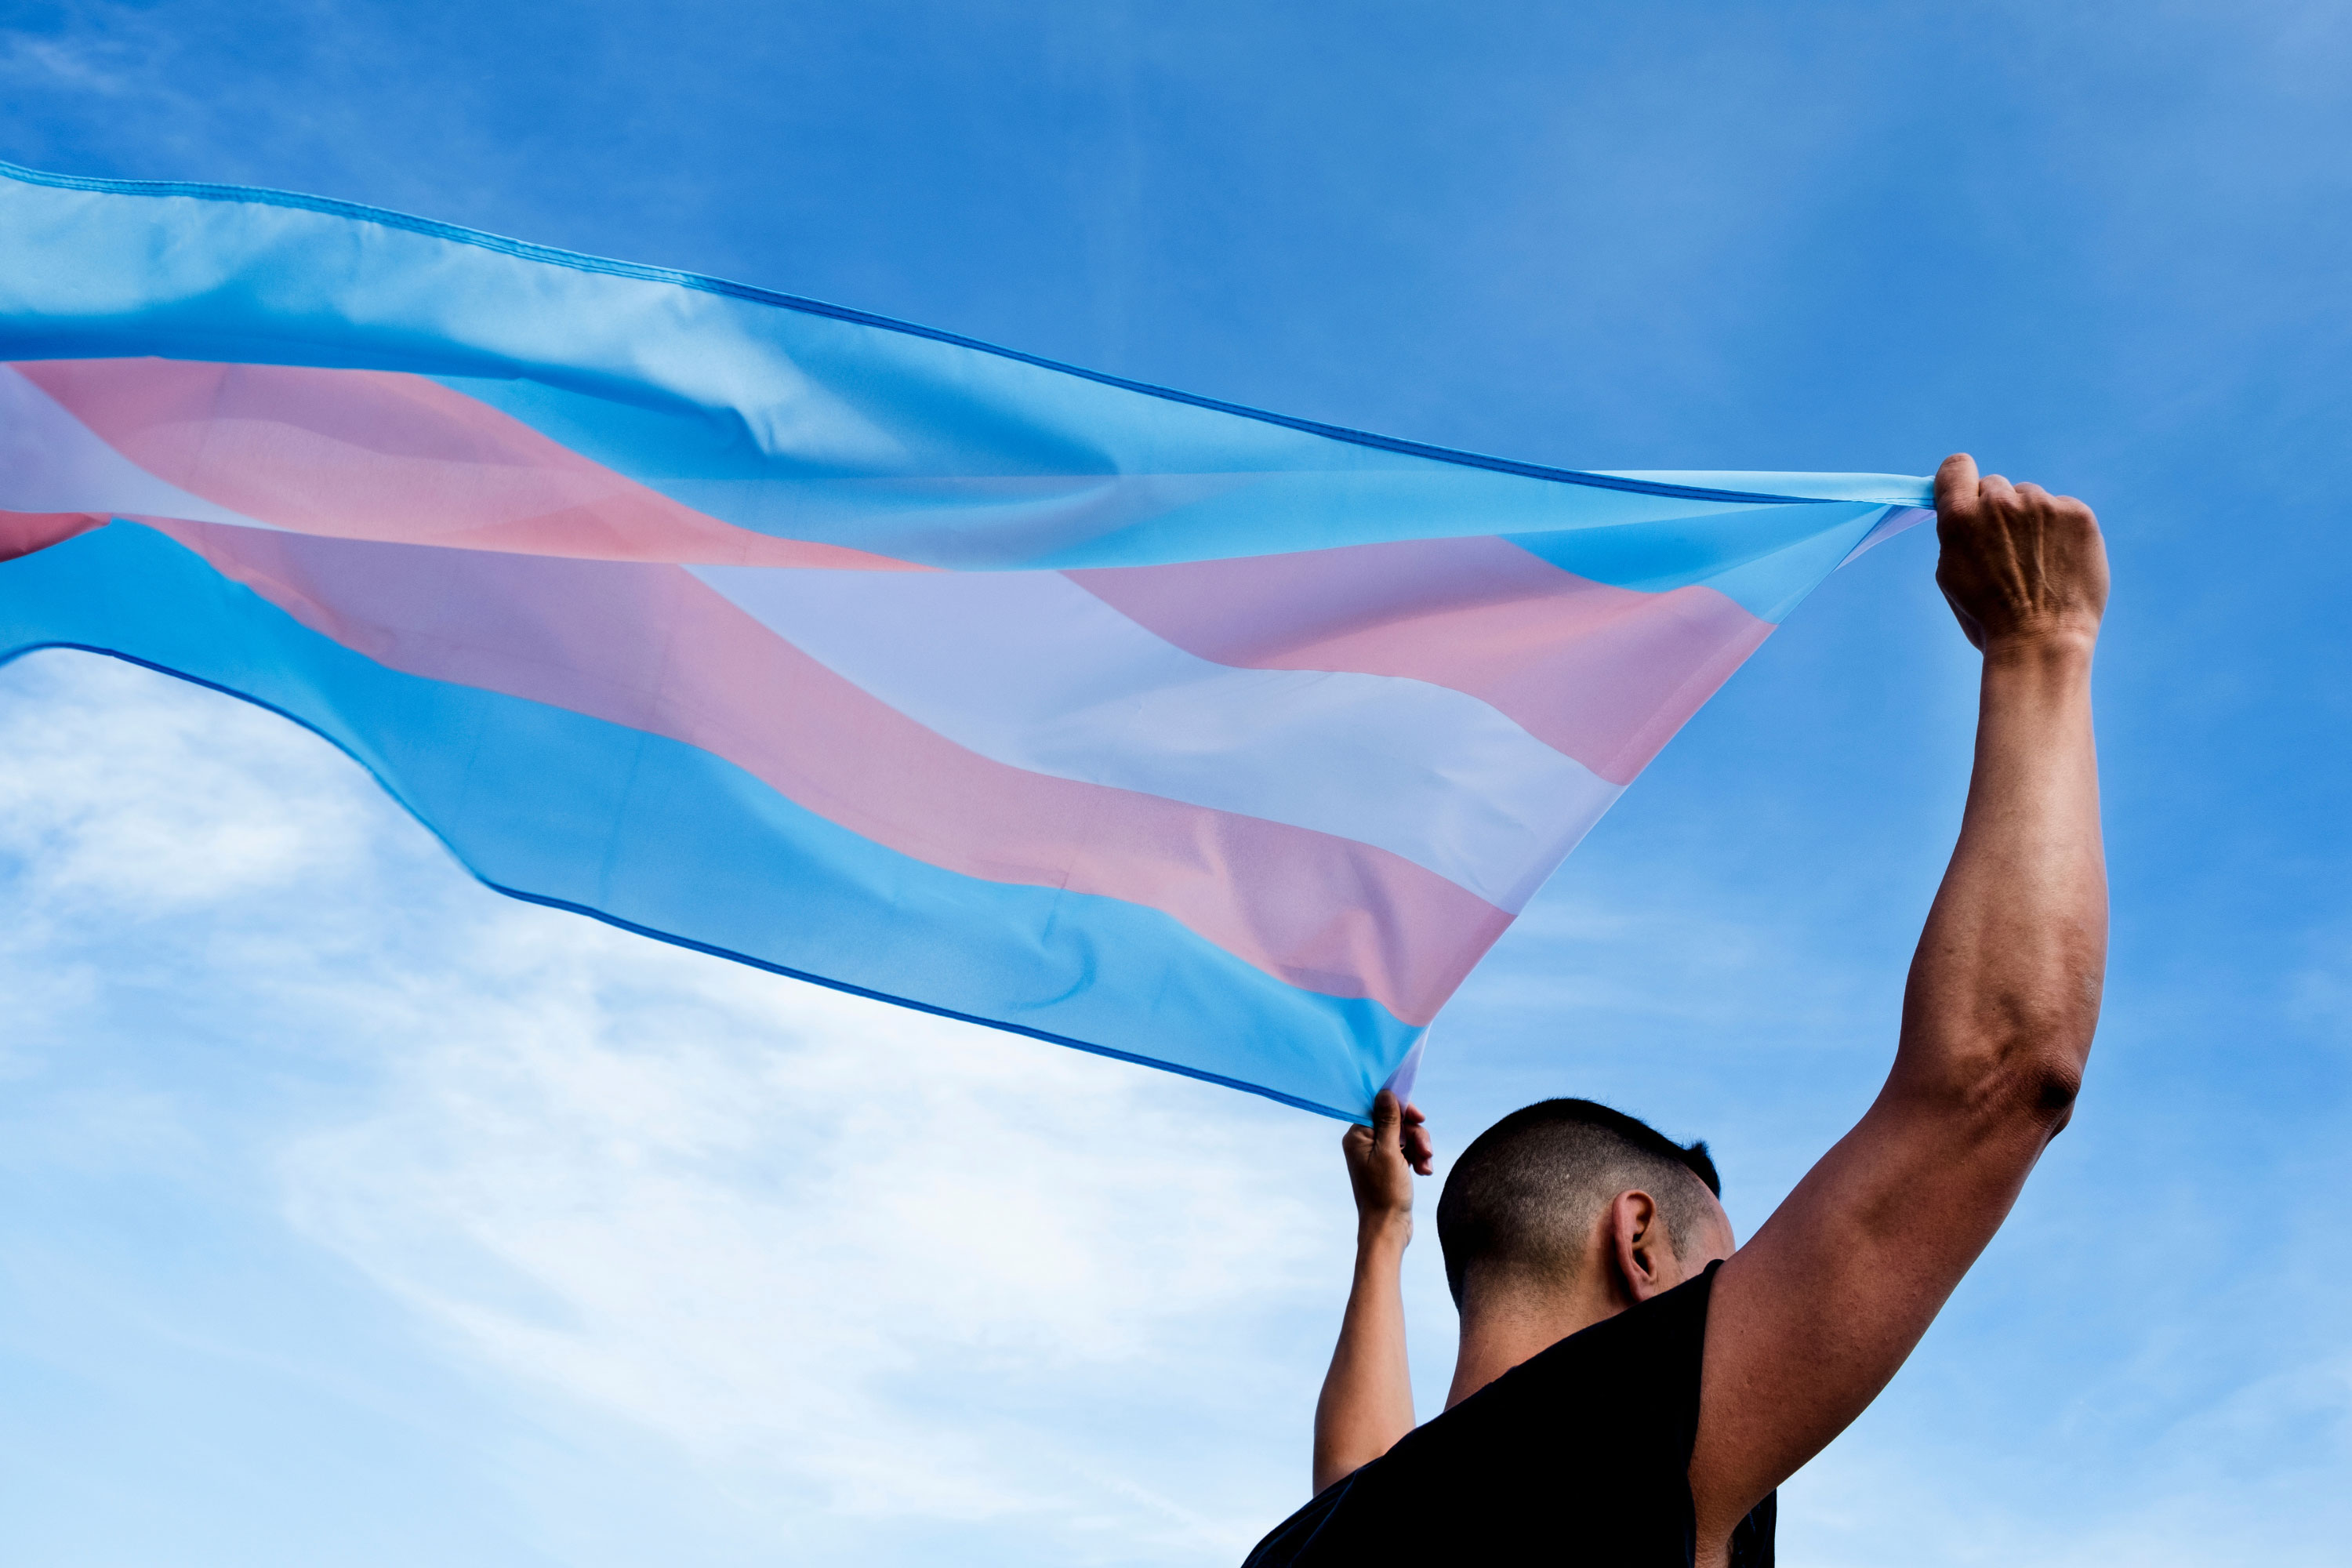 person holds up Transgender Pride flag which flies out behind them